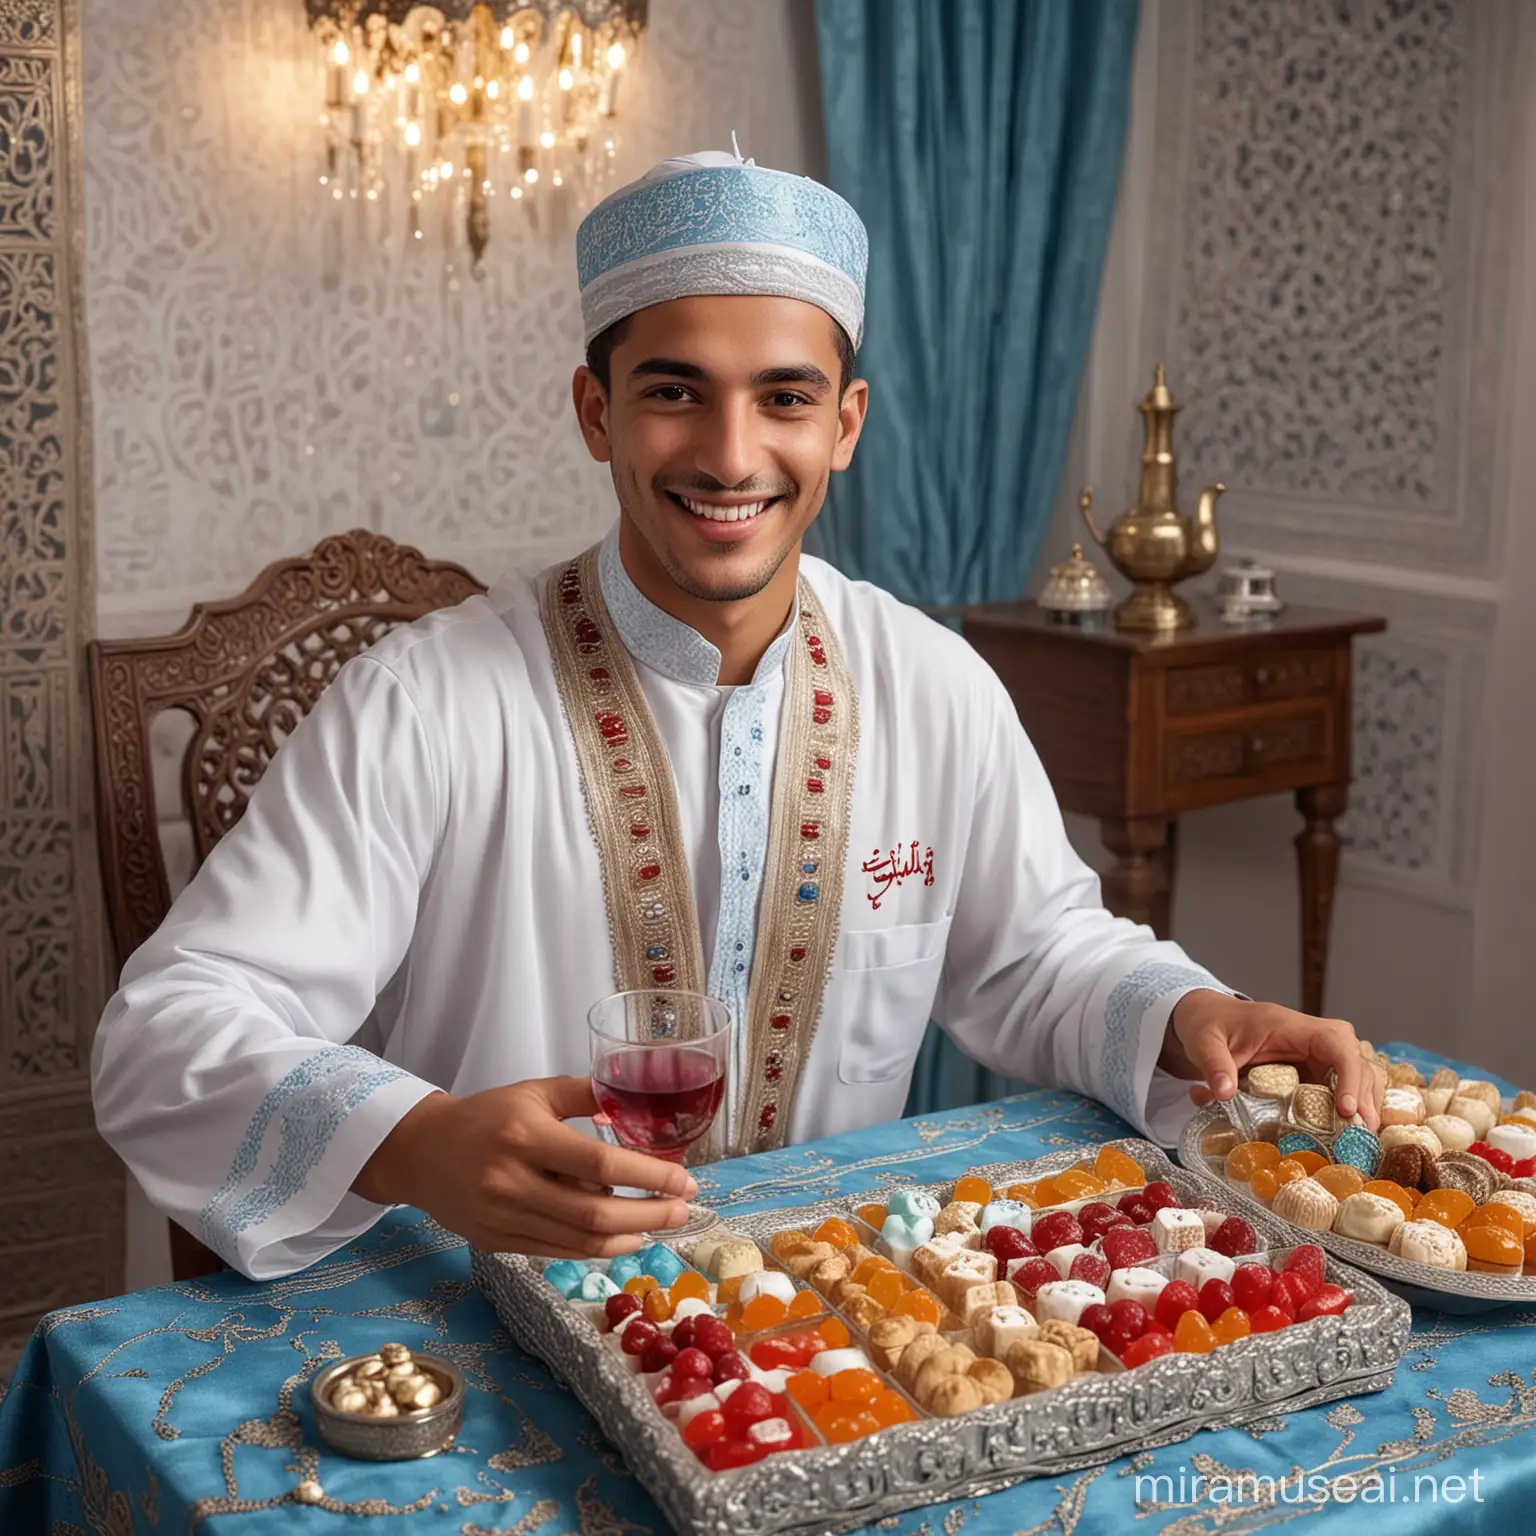 Eid alFitr Celebration Moroccan Man with Sweets and Tea